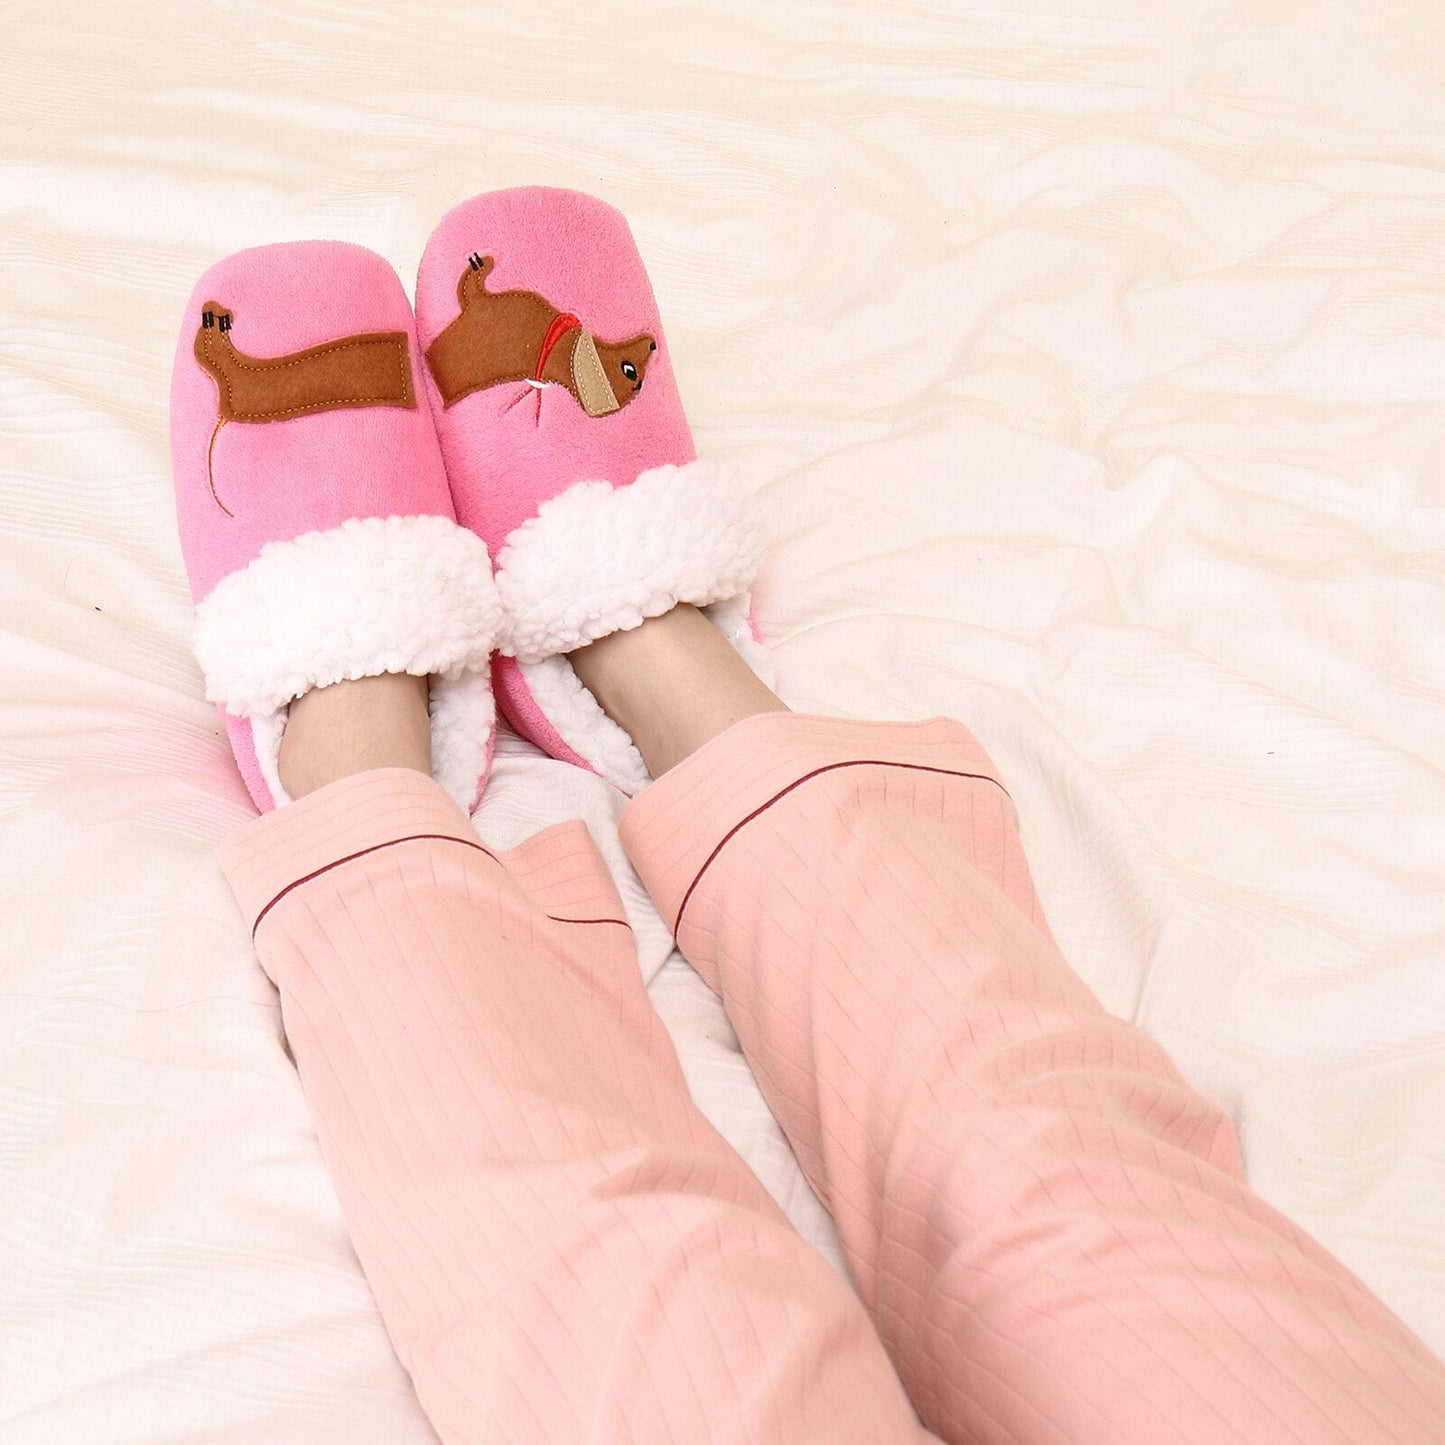 Pink Dachshund Slippers The Doxie World